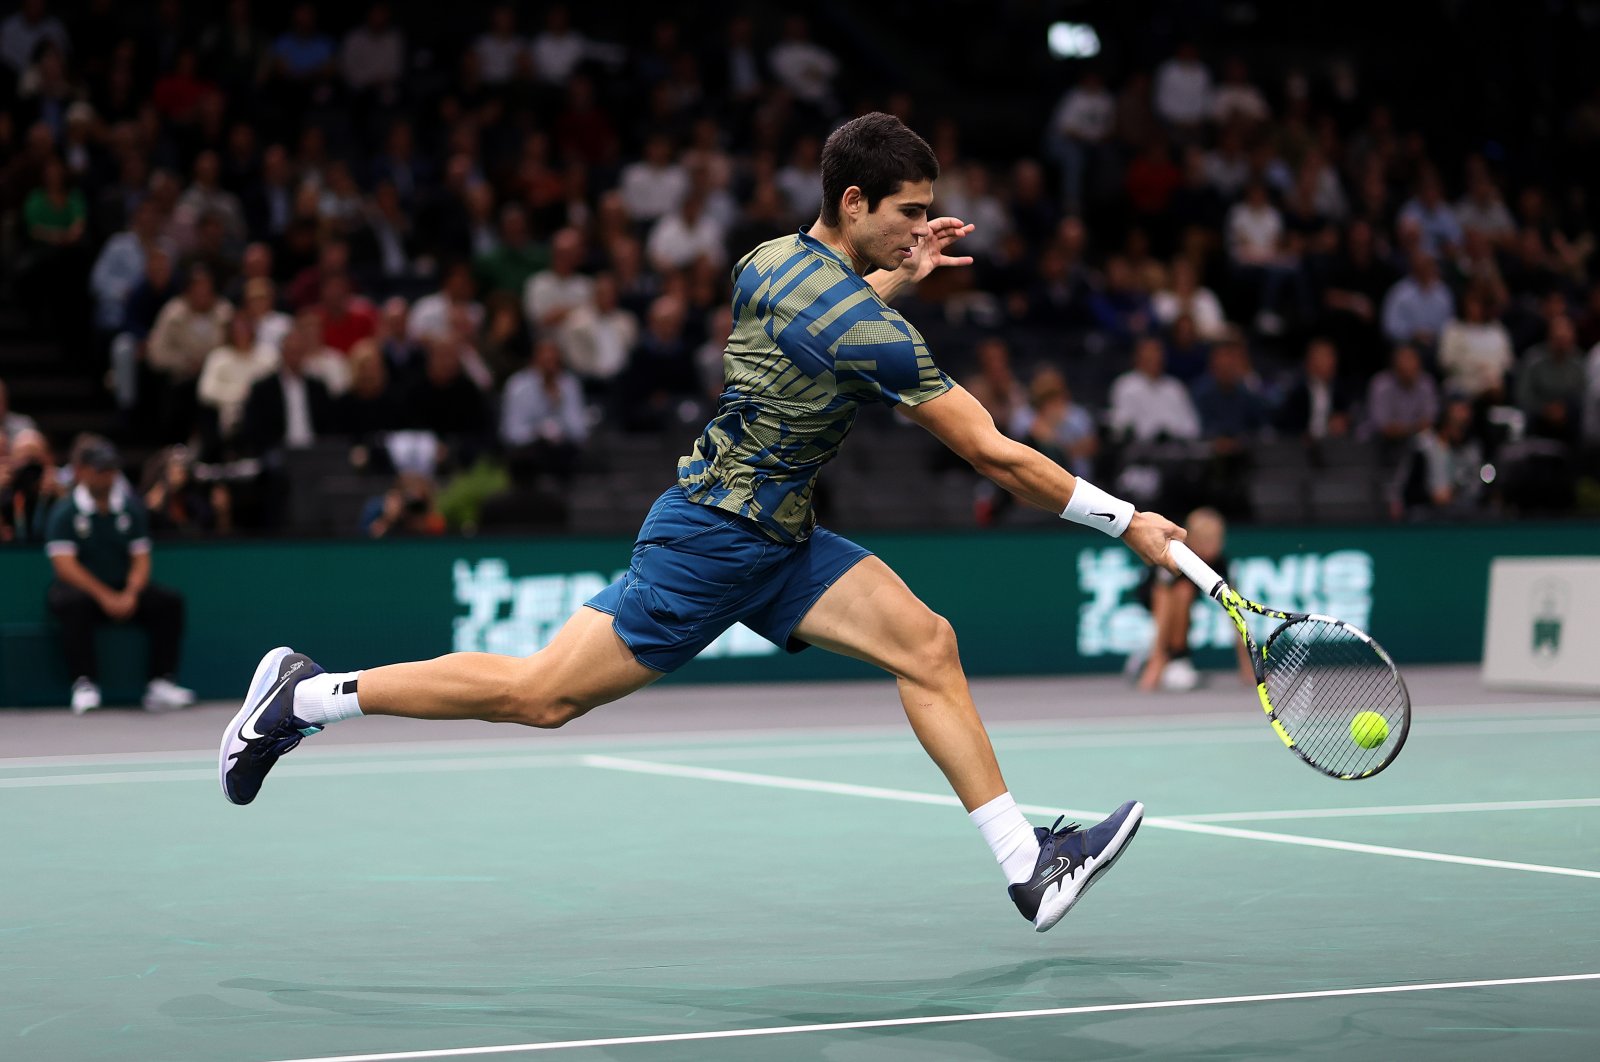 Carlos Alcaraz of Spain in action in his match against Holger Vitus Nodskov Rune of Denmark in the quarterfinals during day five of the Rolex Paris Masters tennis tournament at Palais Omnisports de Bercy, France, Nov. 4, 2022. (Getty Images Photo)